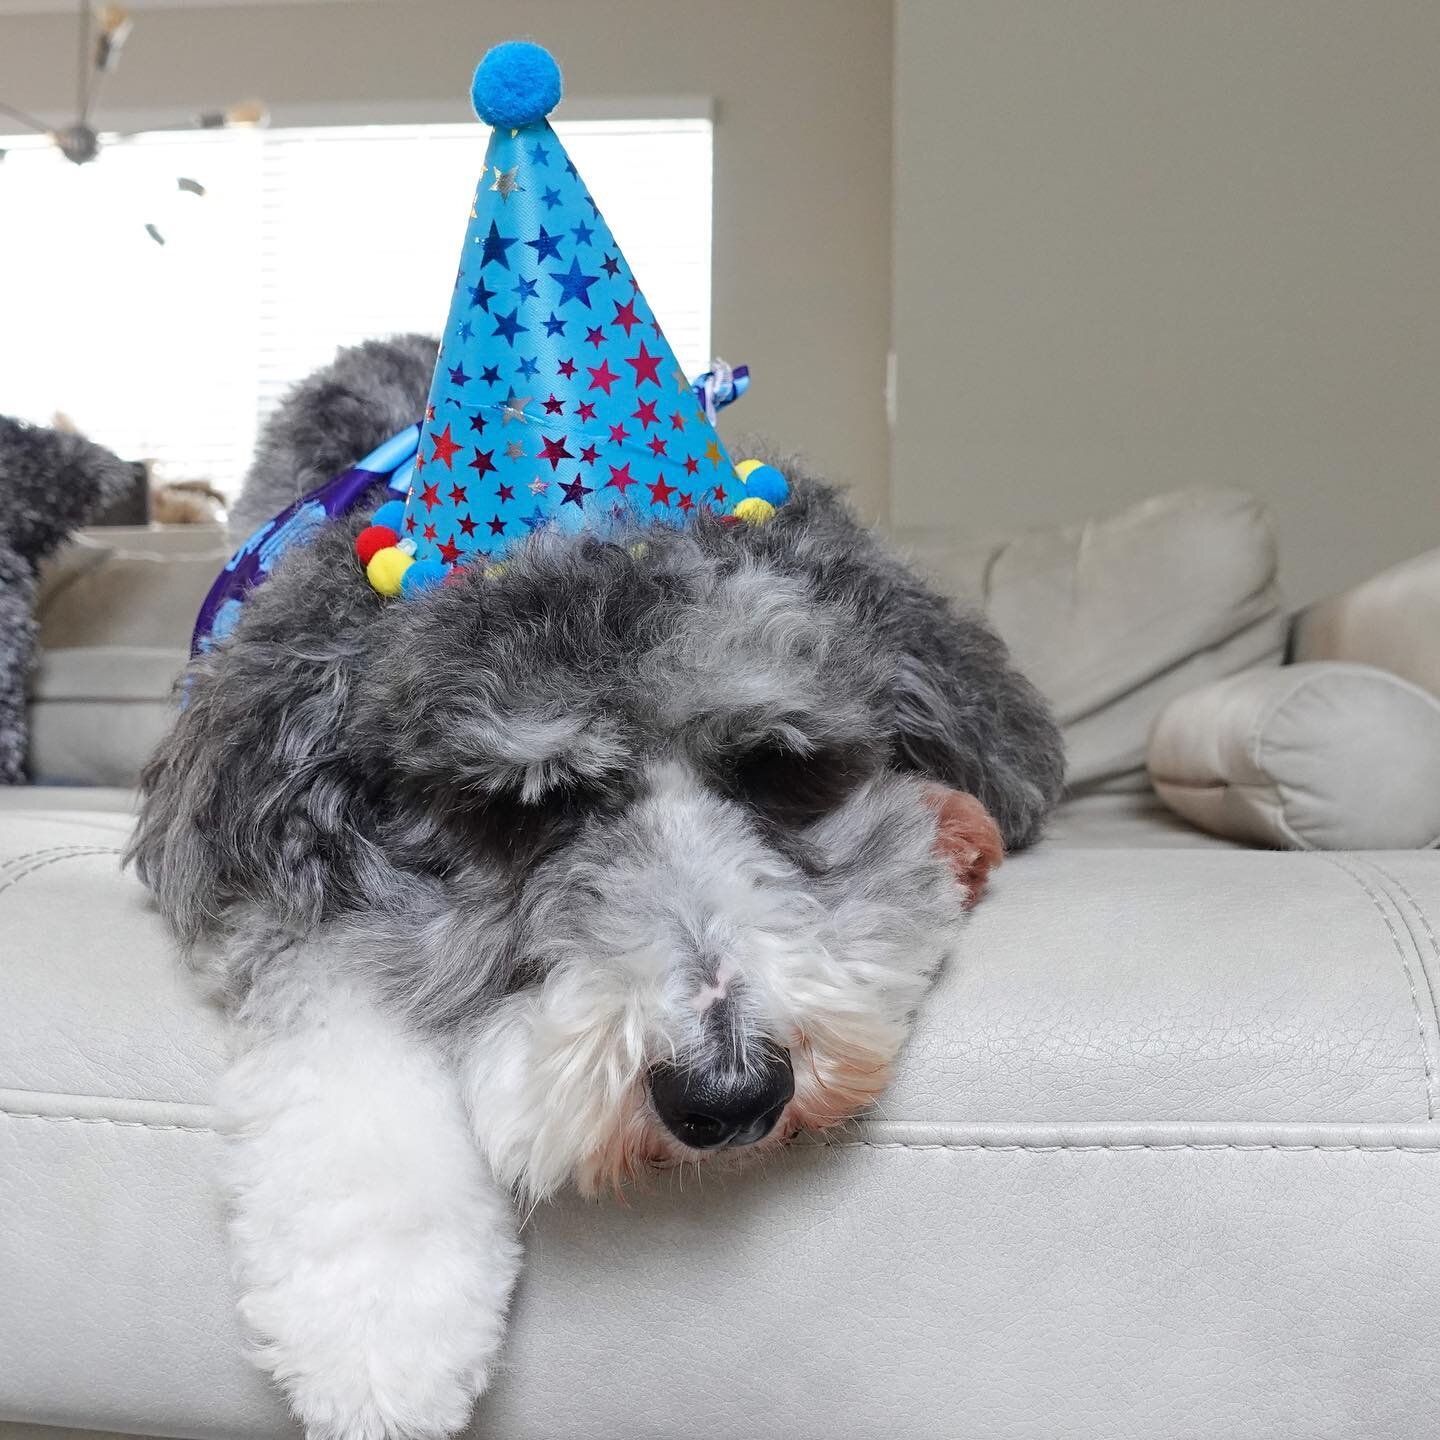 Happy 7th birthday to my favorite boy! Blu Boy, you are such an affectionate and mischievous little companion, I can&rsquo;t imagine this world without you in it. We love you! 💙💙💙
.
.
.
.
#hehateshishat
#doodlesofinstagram
#aussiedoodle
#doodlegan